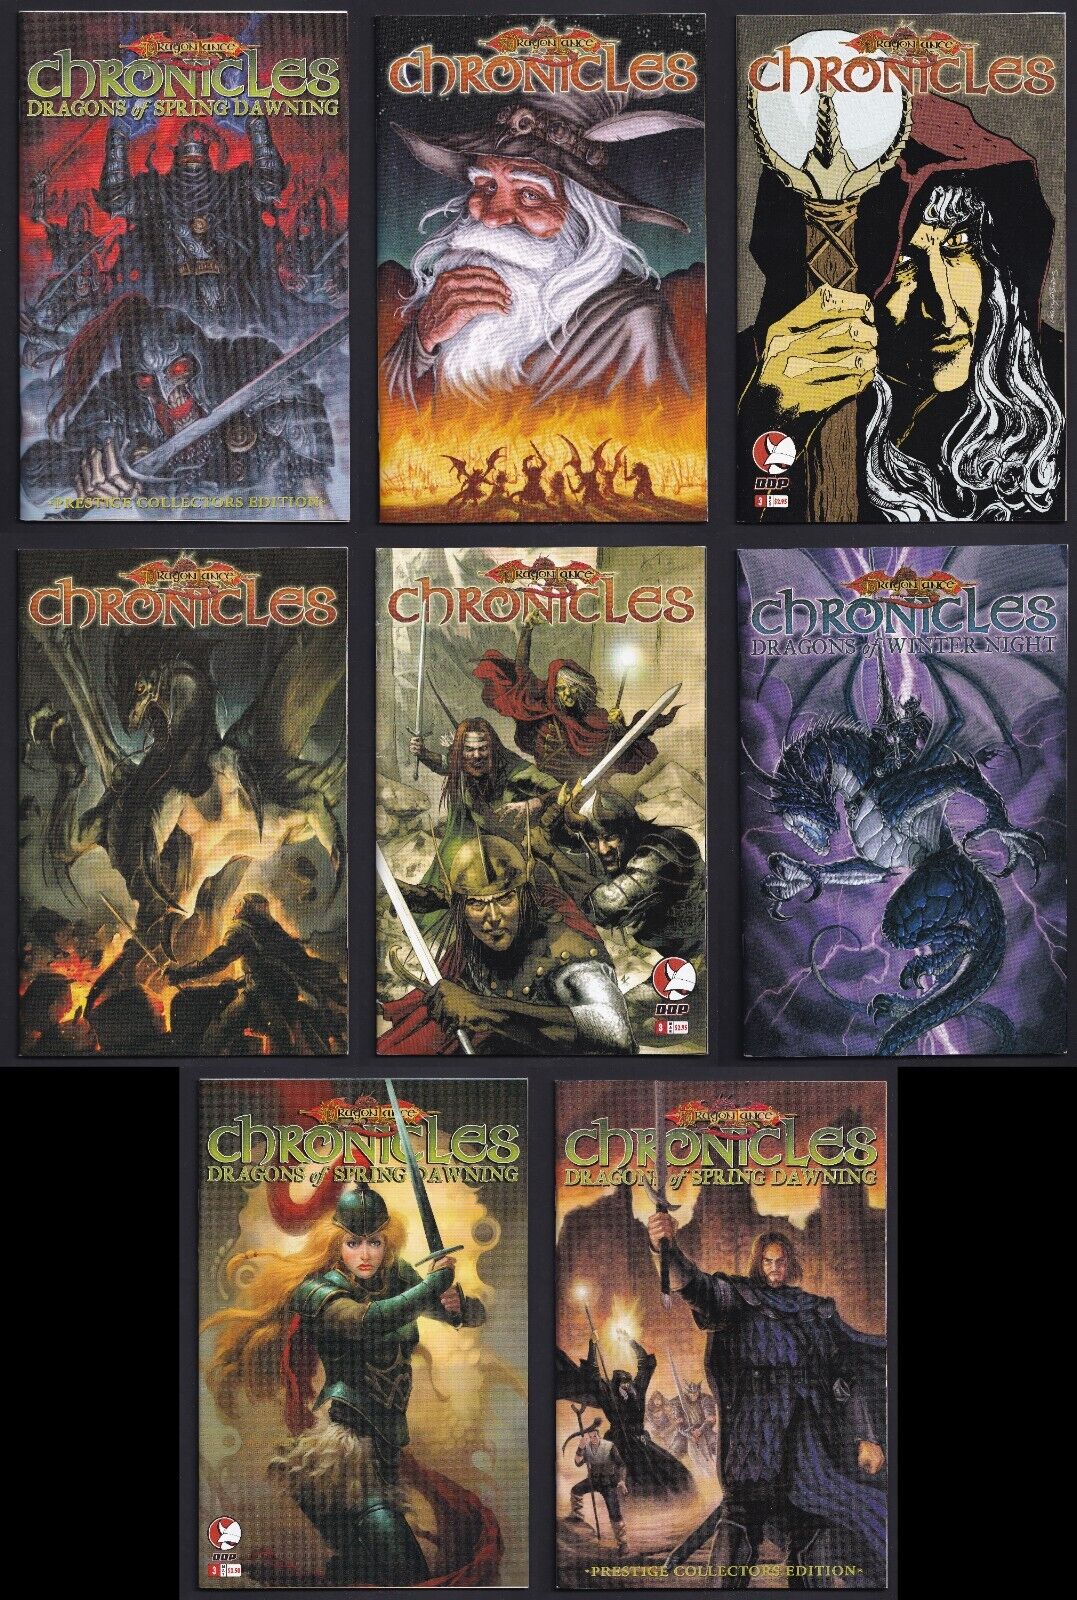 Dragonlance Chronicles 8 issues - Dragons of Autumn/Spring/Winter (DDP 2005)